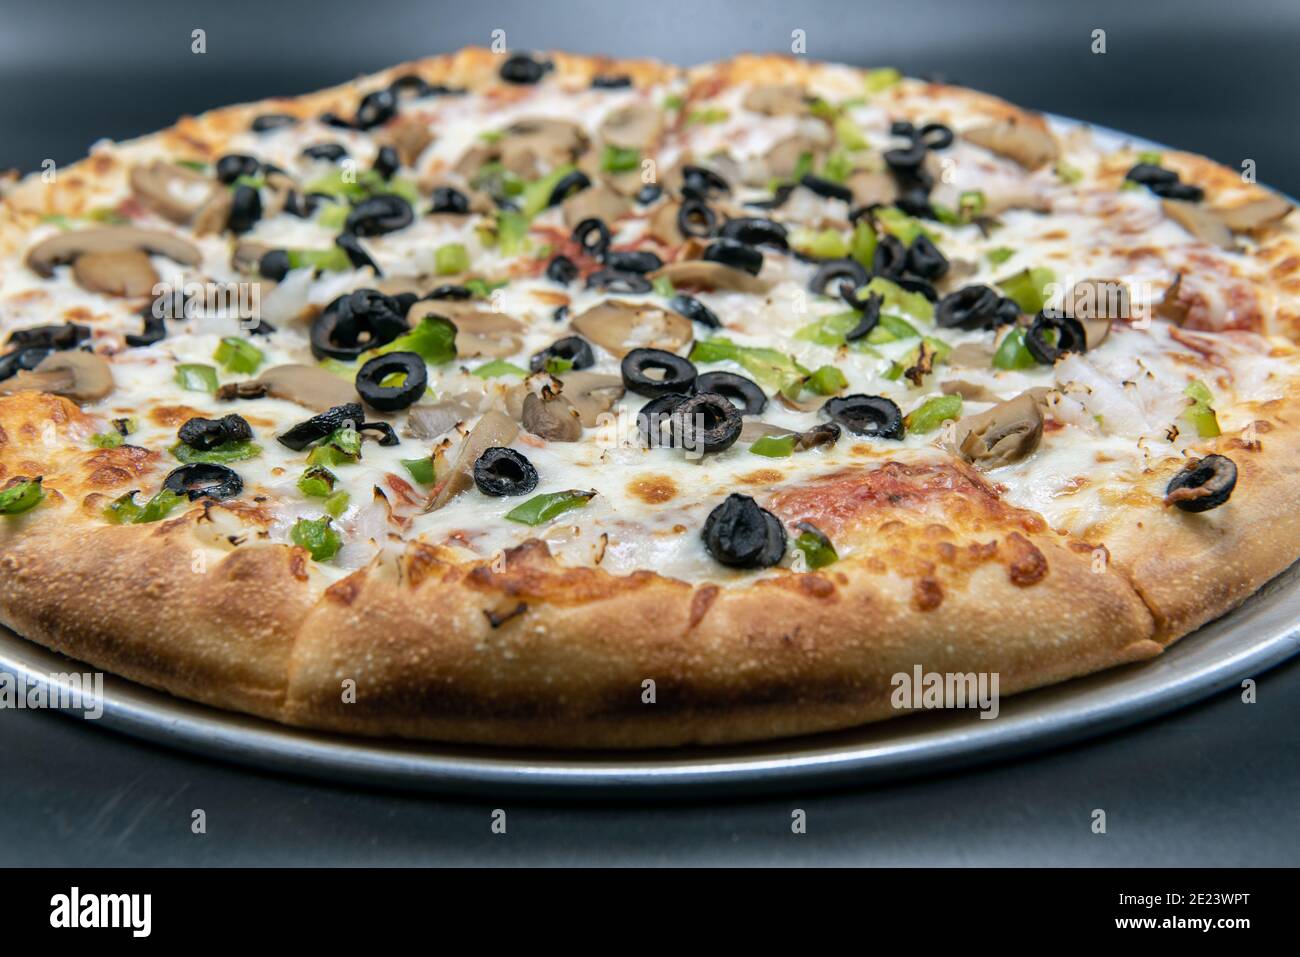 Veggie vegetable covered pizza with melted cheese tempting for those avoiding meat. Stock Photo